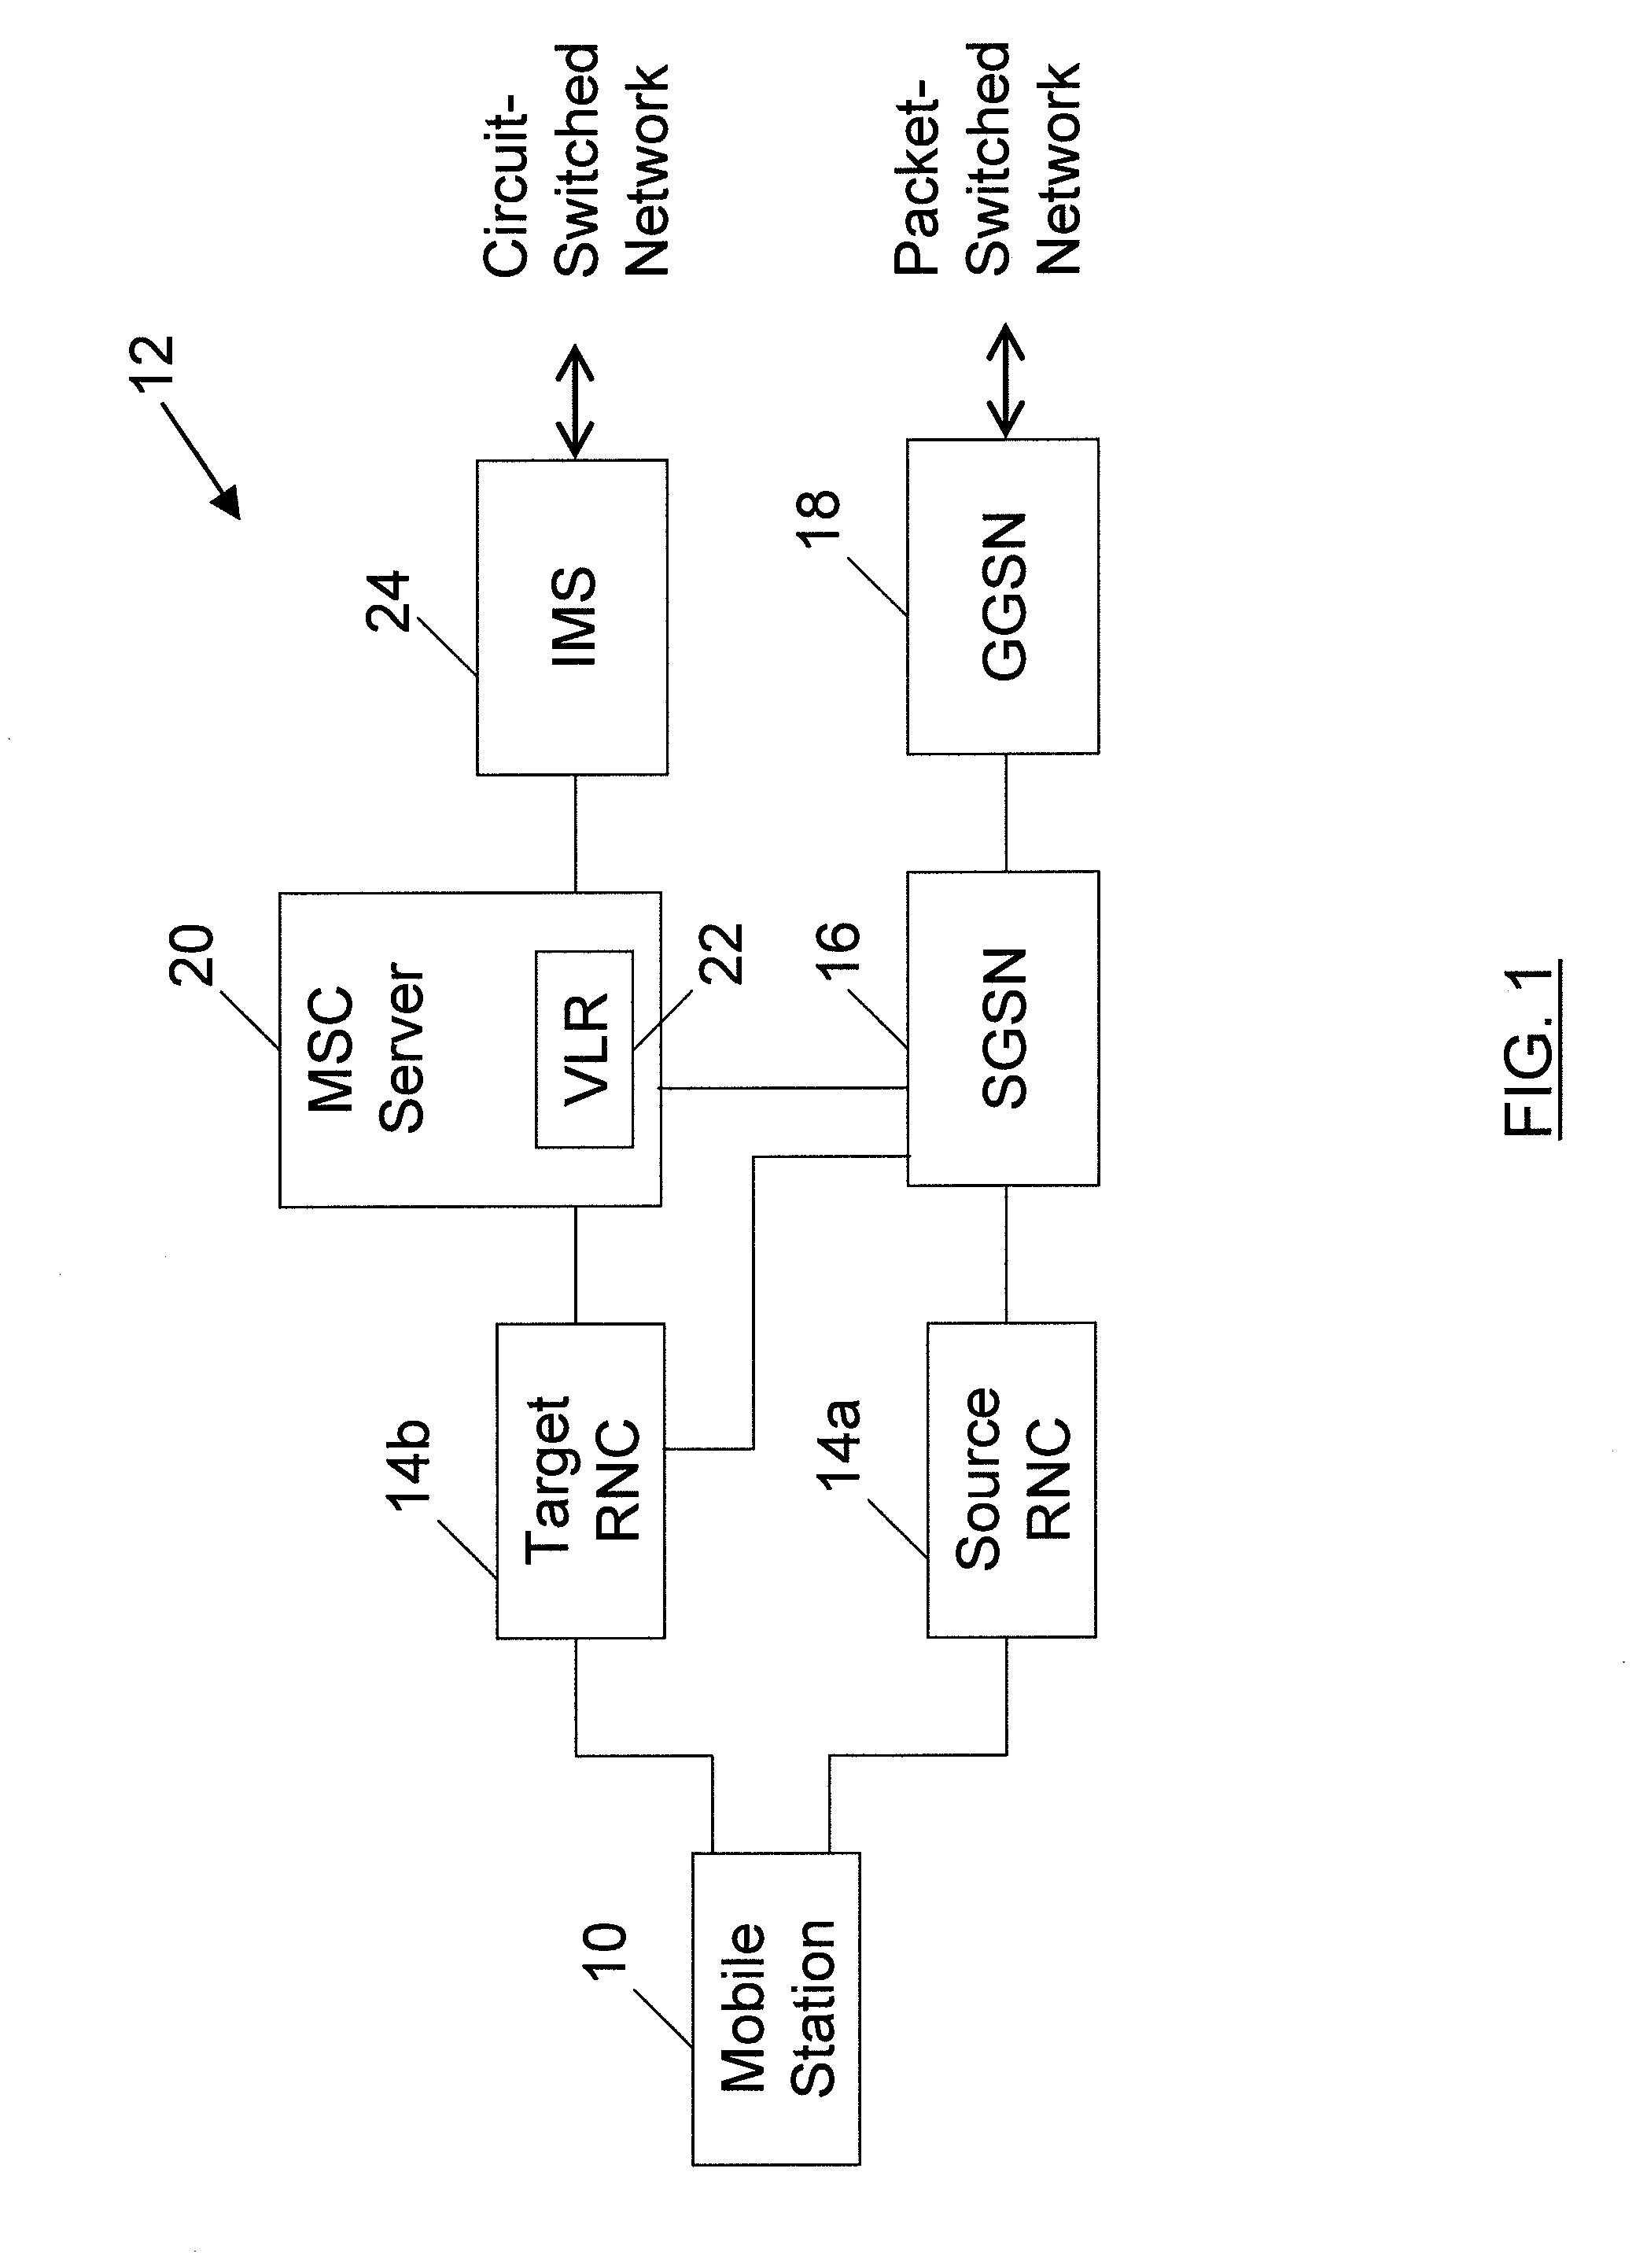 Method, Apparatus And Computer Program Product For Providing Security During Handover Between A Packet-Switched Network And A Circuit-Switched Network